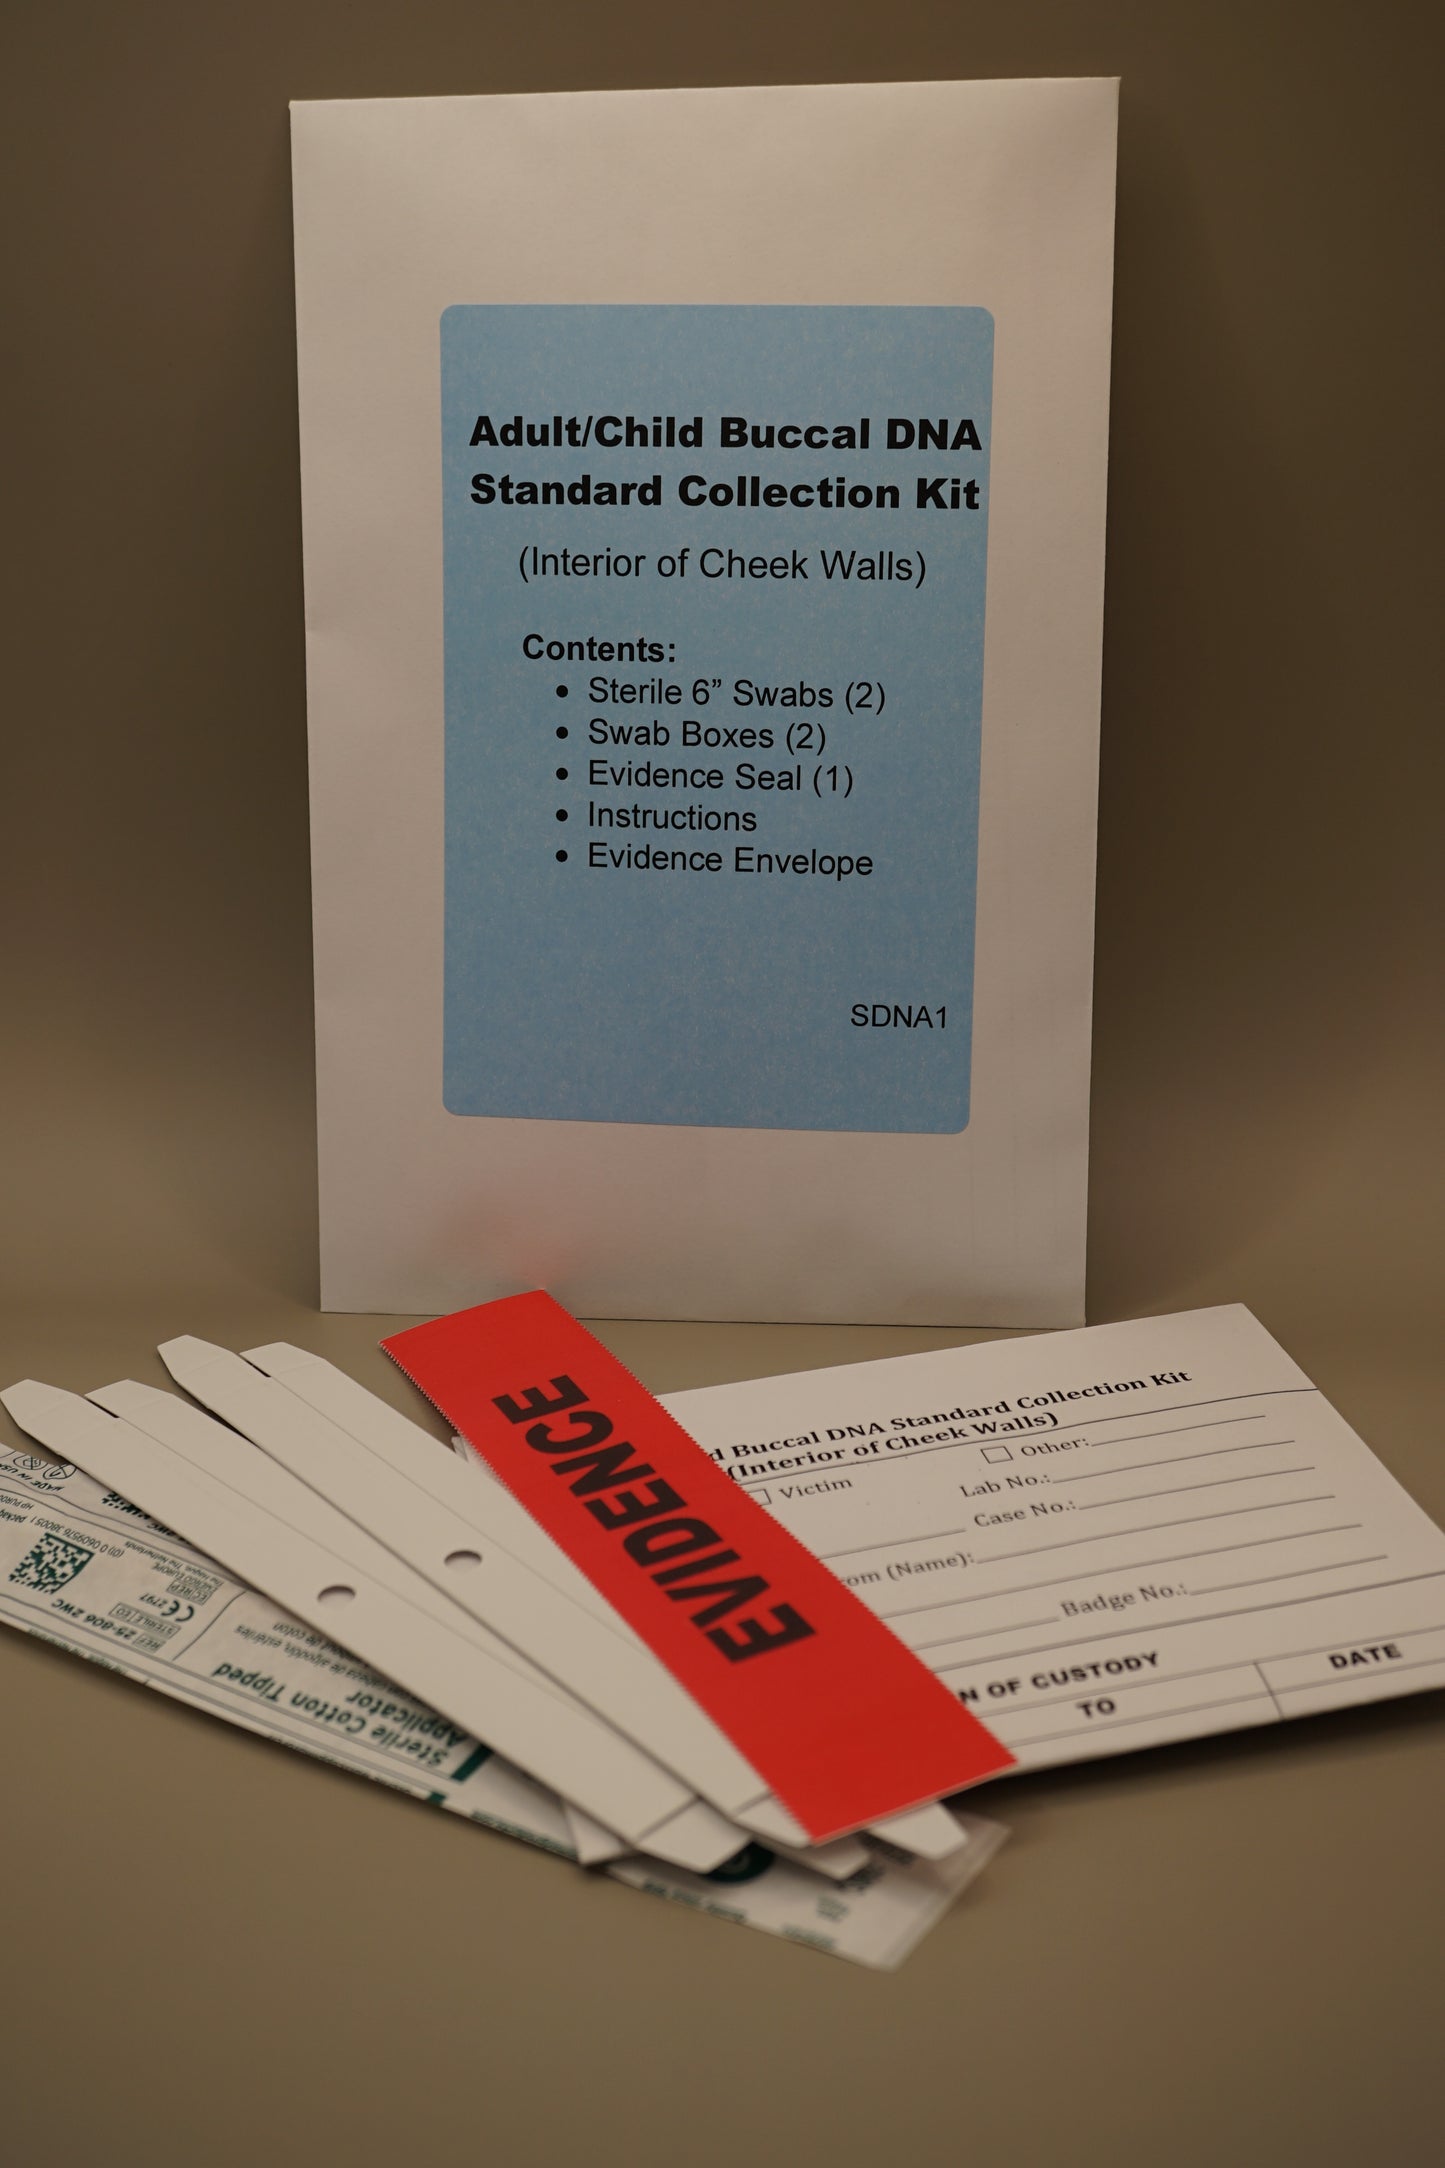 Adult/Child Buccal DNA Standard Collection Kit